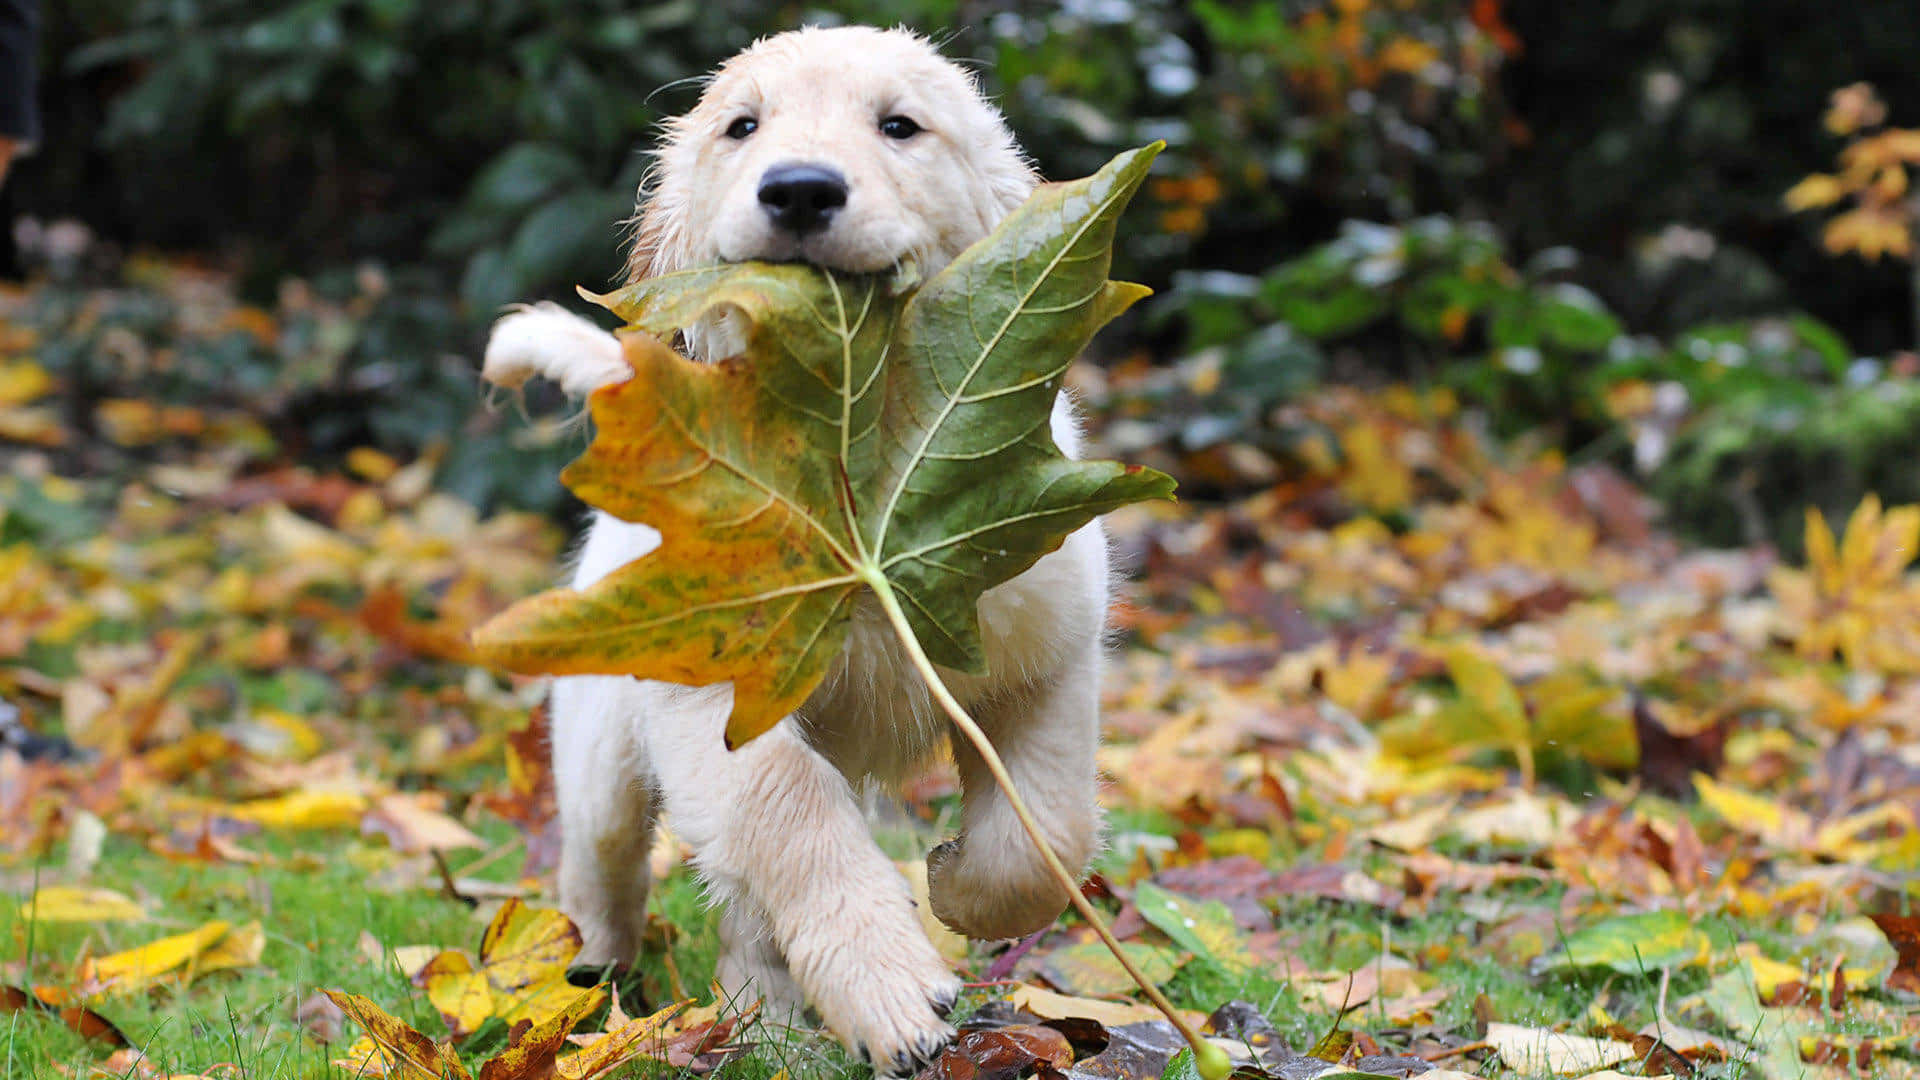 Playful Puppy With Autumn Leaf Wallpaper